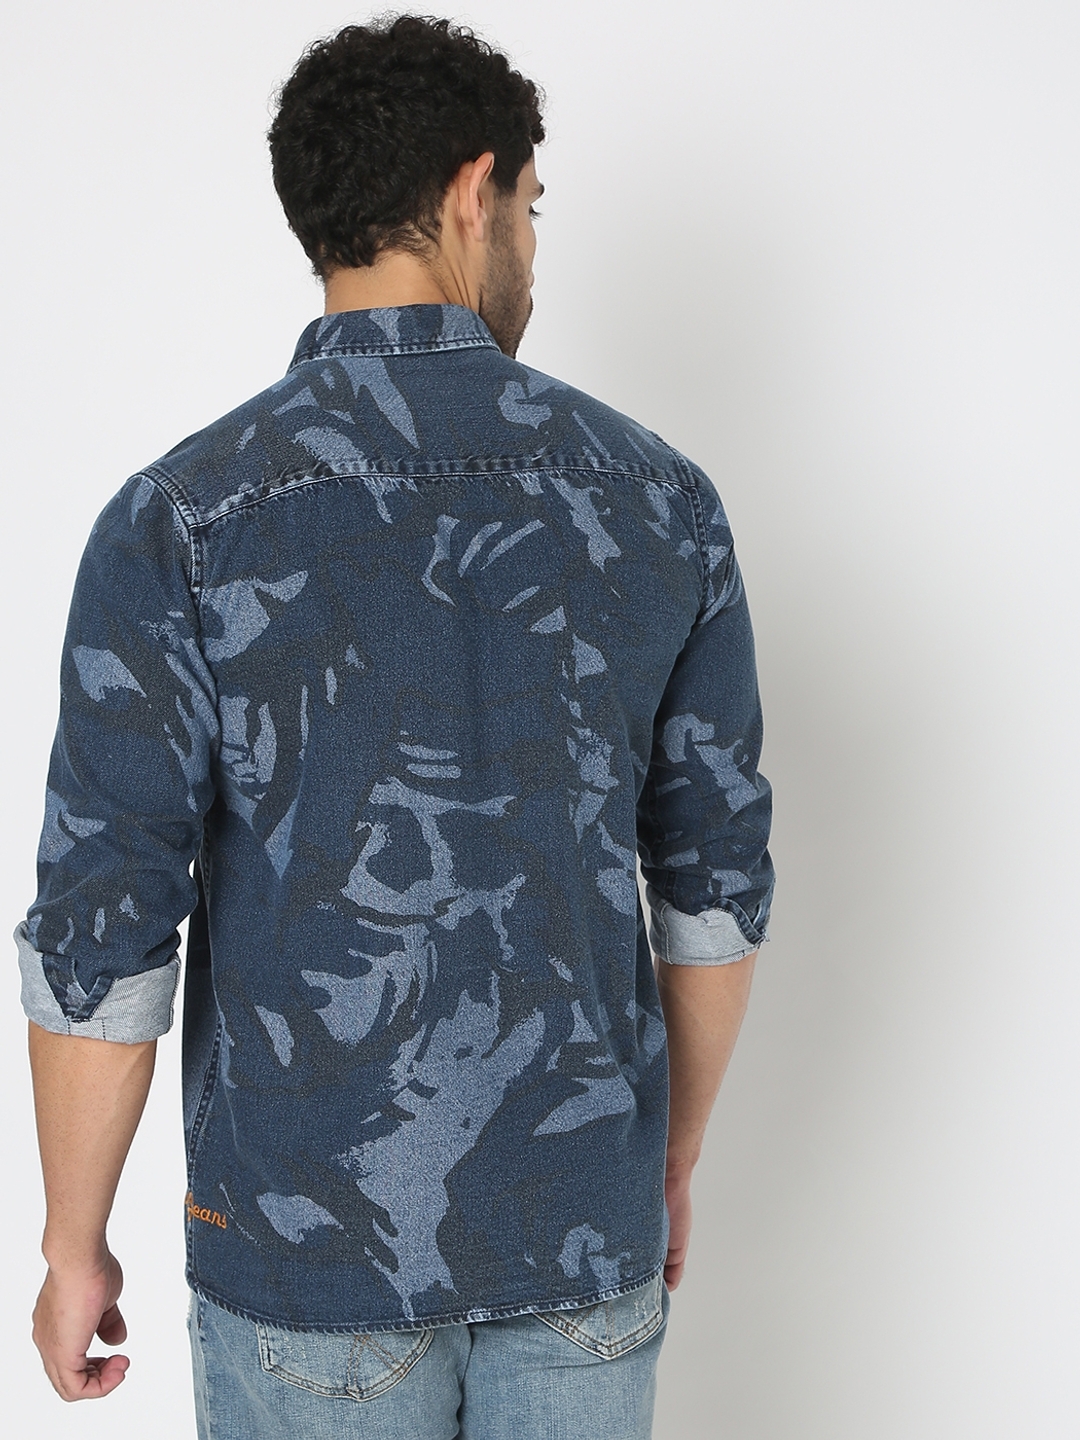 Darion Neo Camouflage Print IN Shirt